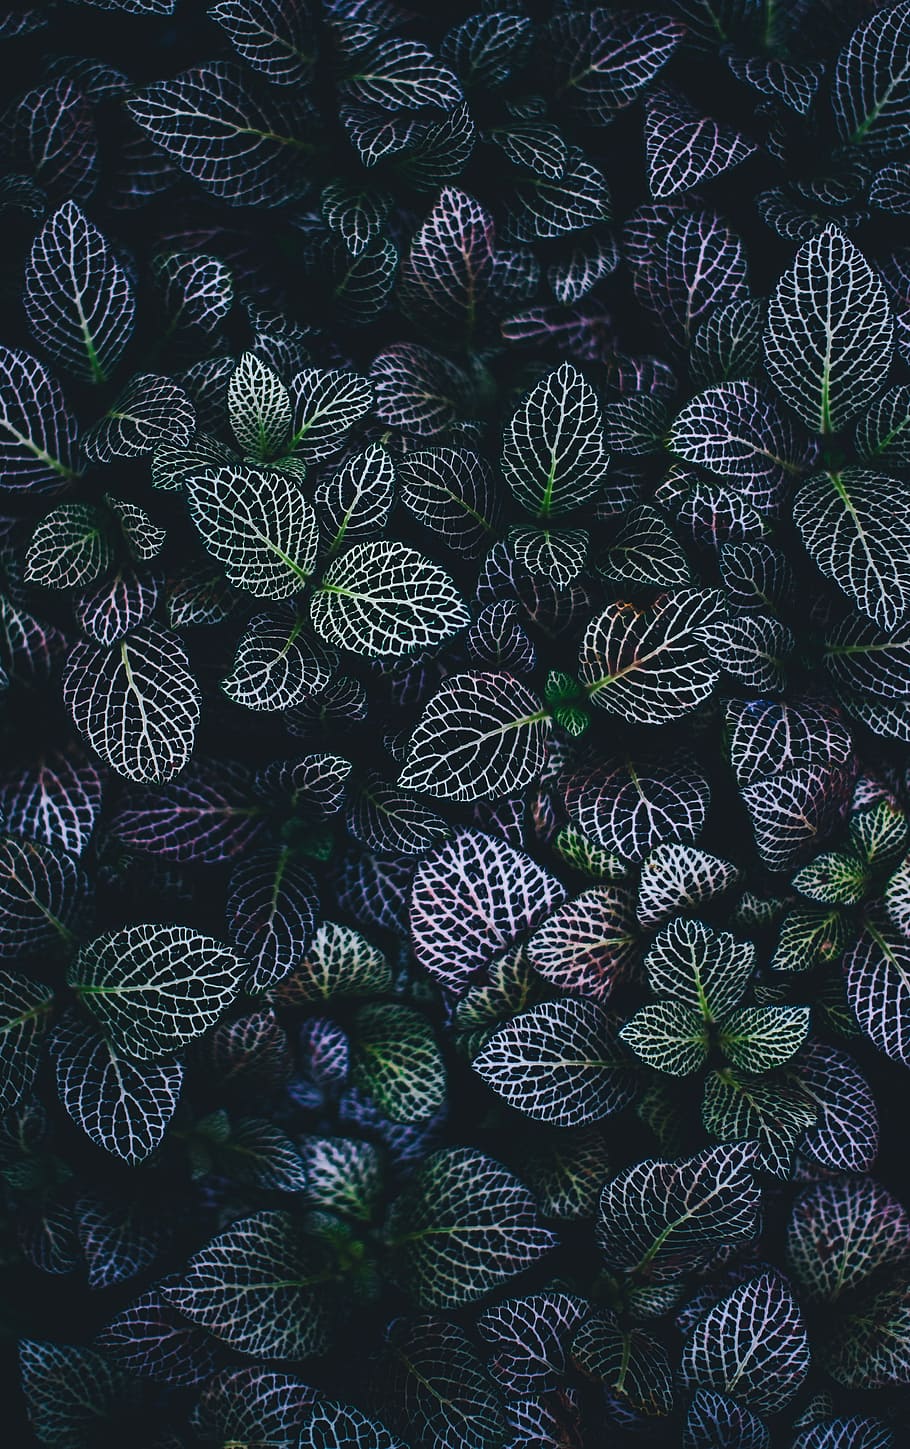 close, purple, green, leafed, plants, close up, nature, plant, pattern, backgrounds